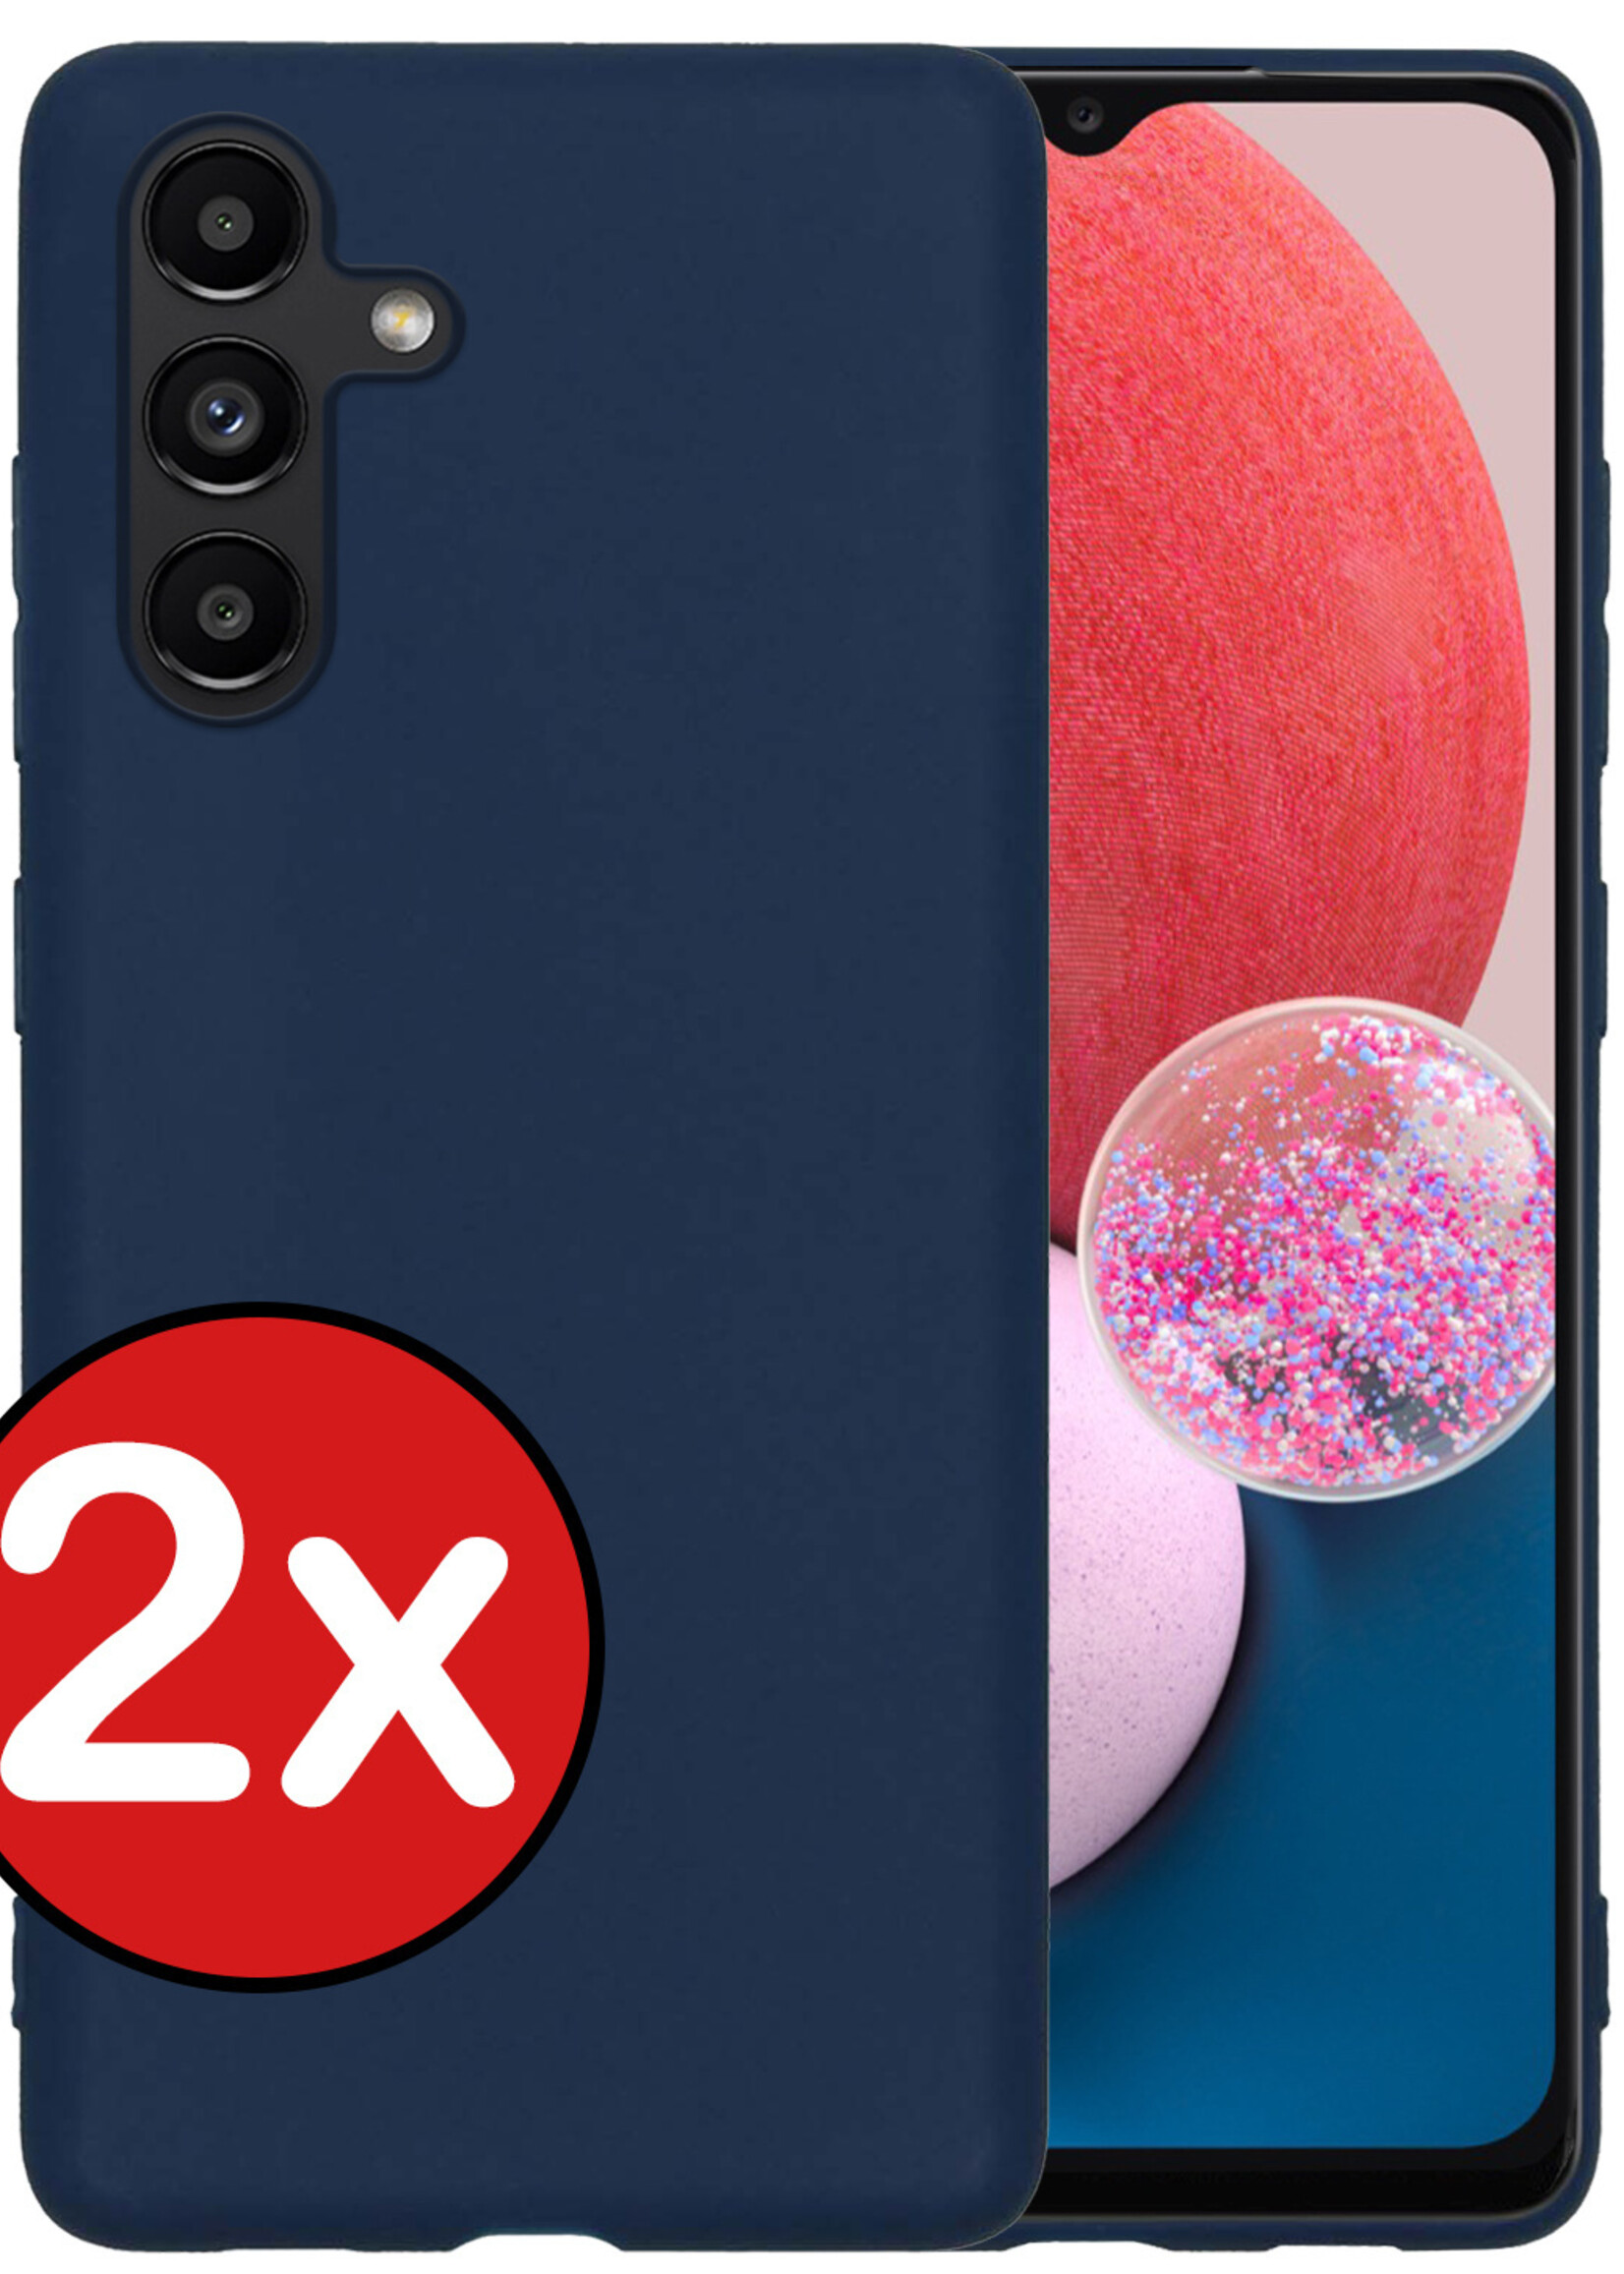 BTH Hoesje Geschikt voor Samsung A13 5G Hoesje Siliconen Case Hoes - Hoes Geschikt voor Samsung Galaxy A13 5G Hoes Cover Case - Donkerblauw - 2 PACK